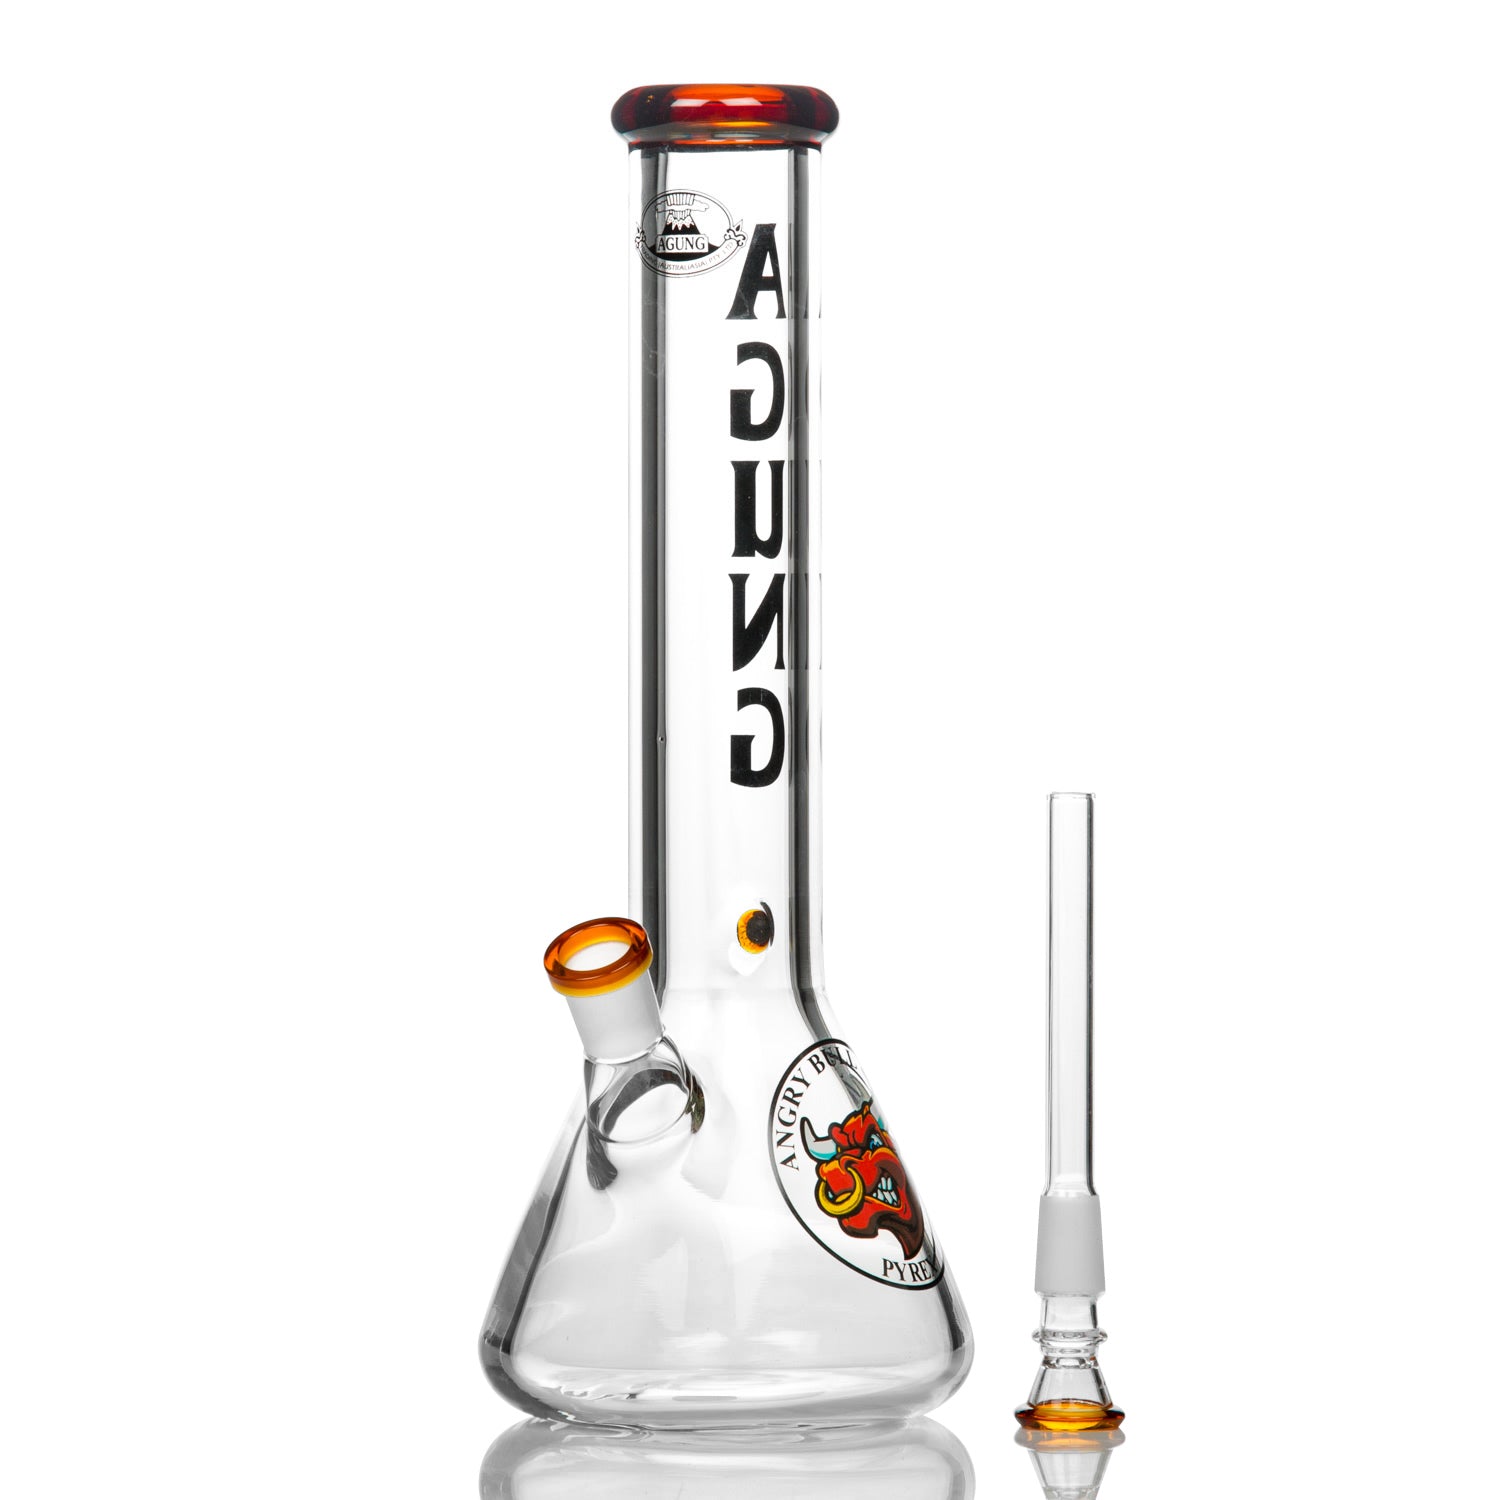 Agung glass bongs with glass down stem and cone piece for sale in Brisbane Australia.